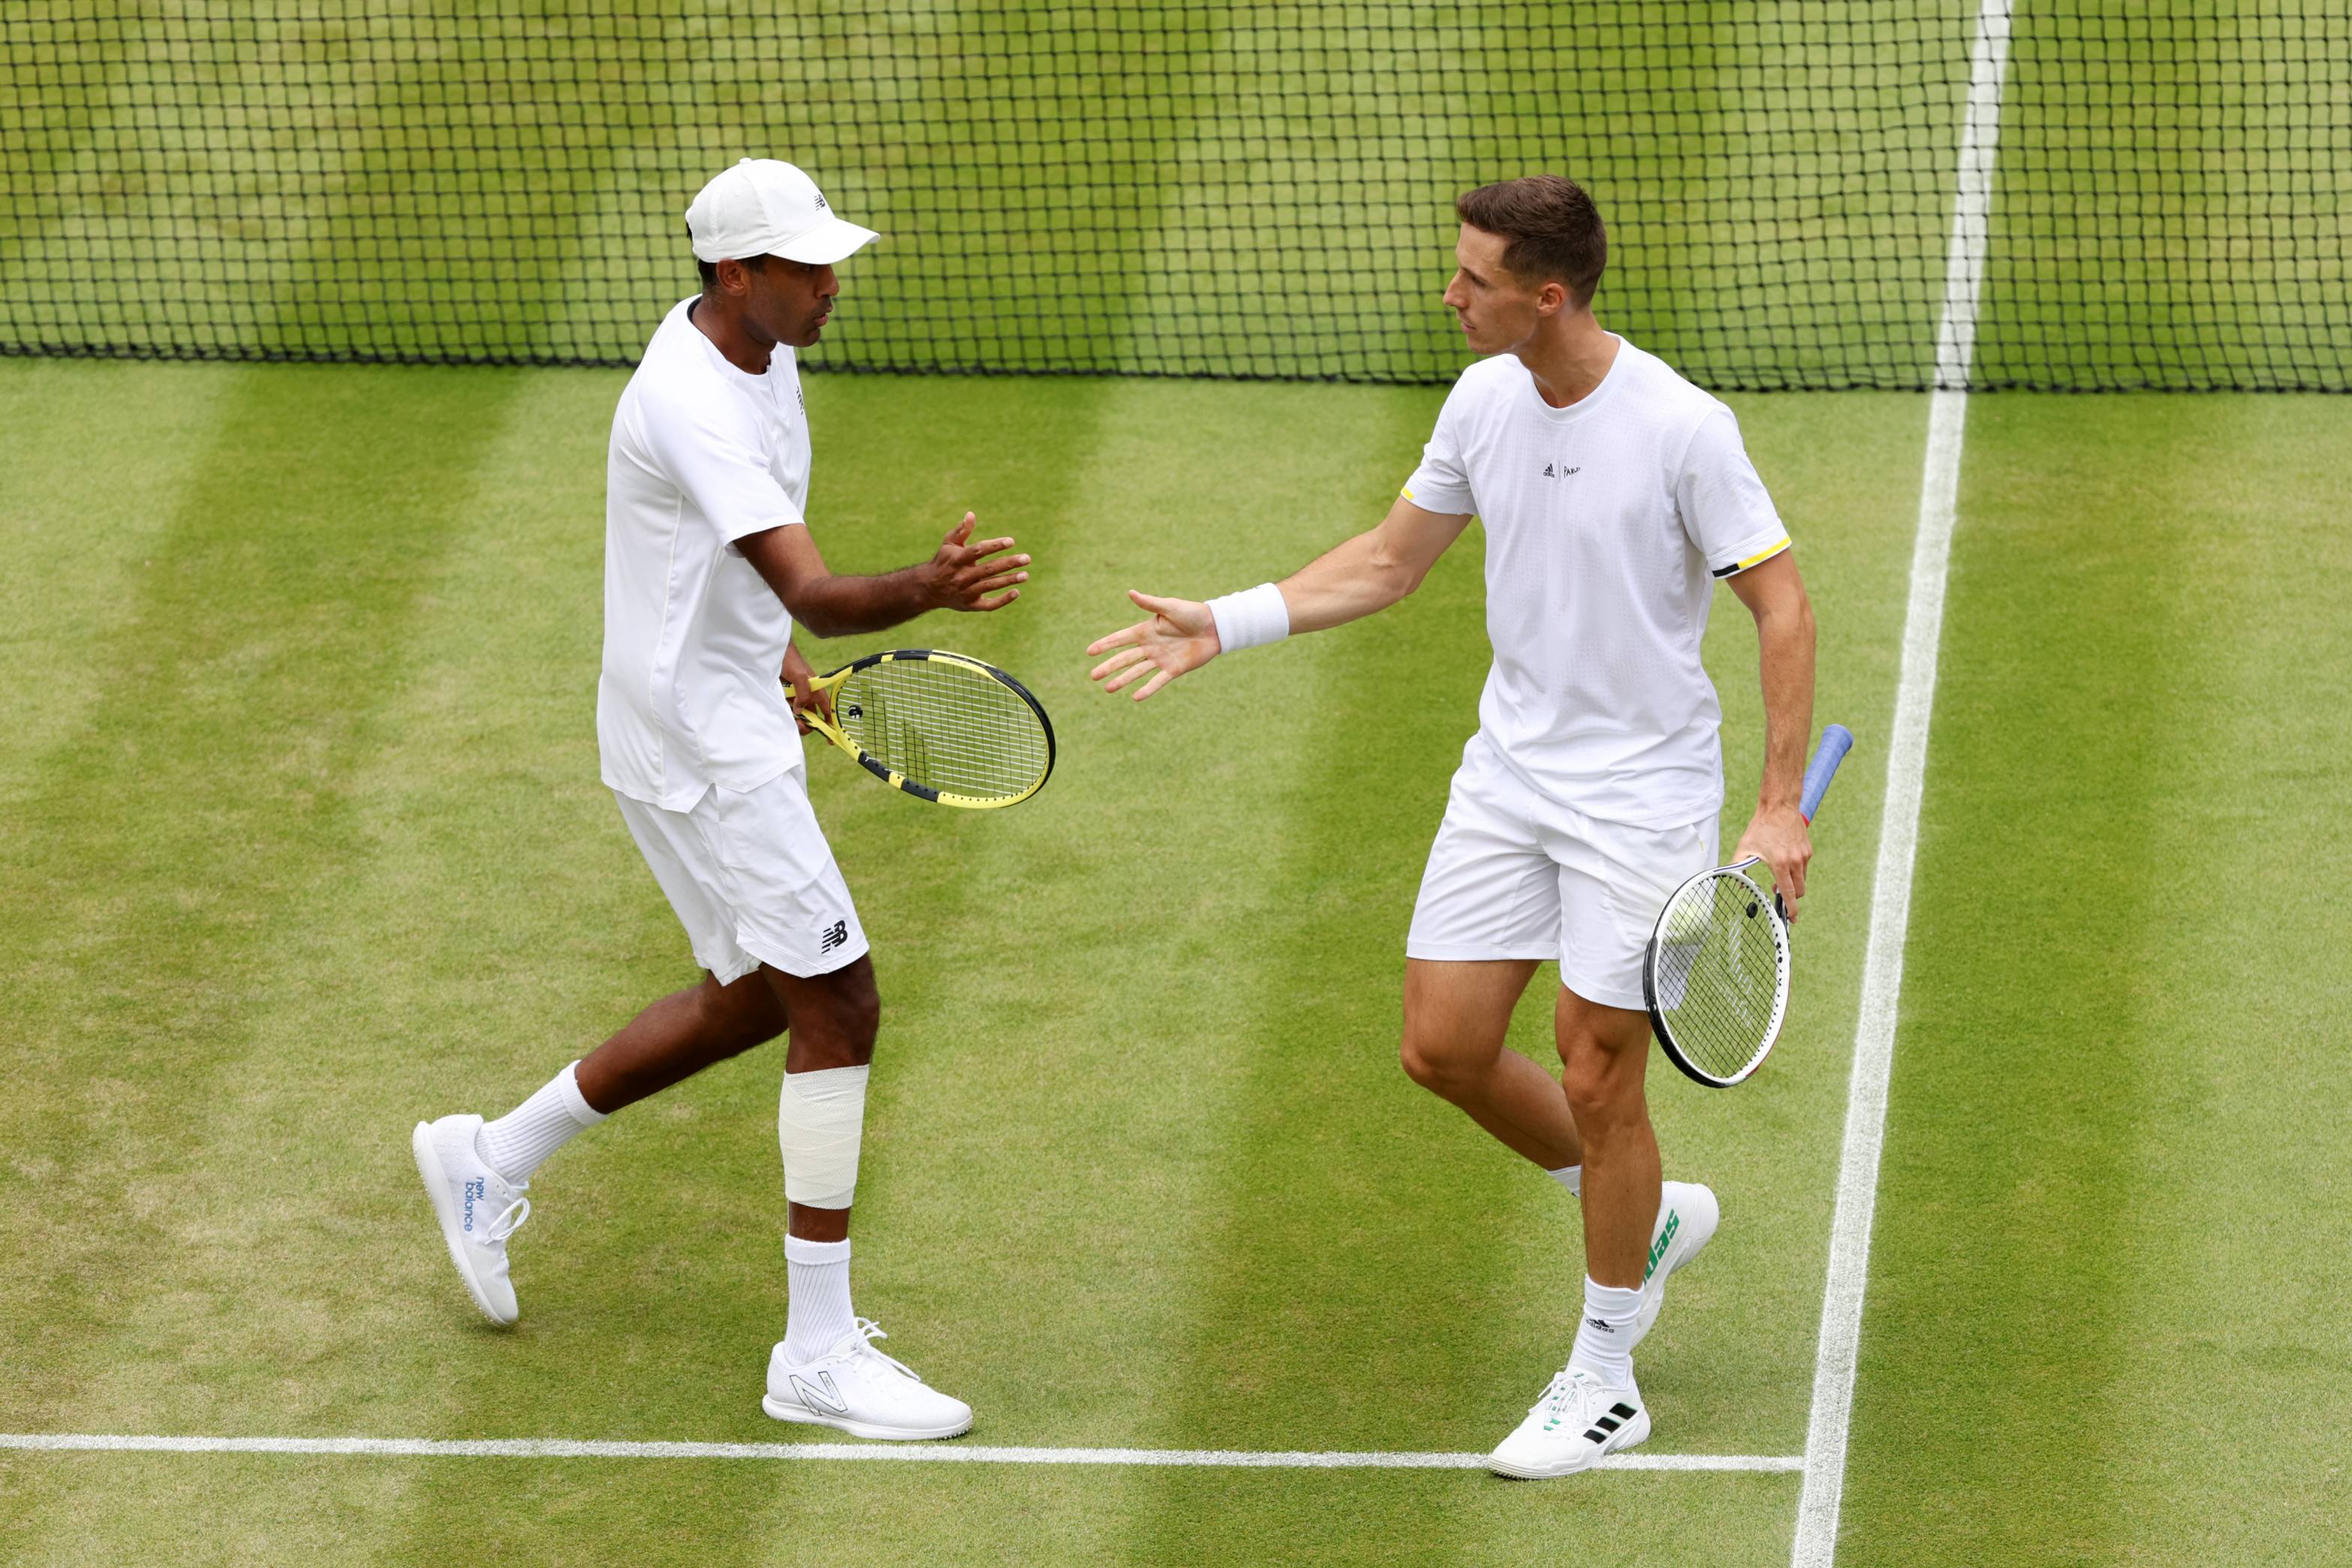 Wimbledon 2022: Britwatch - which British players are competing